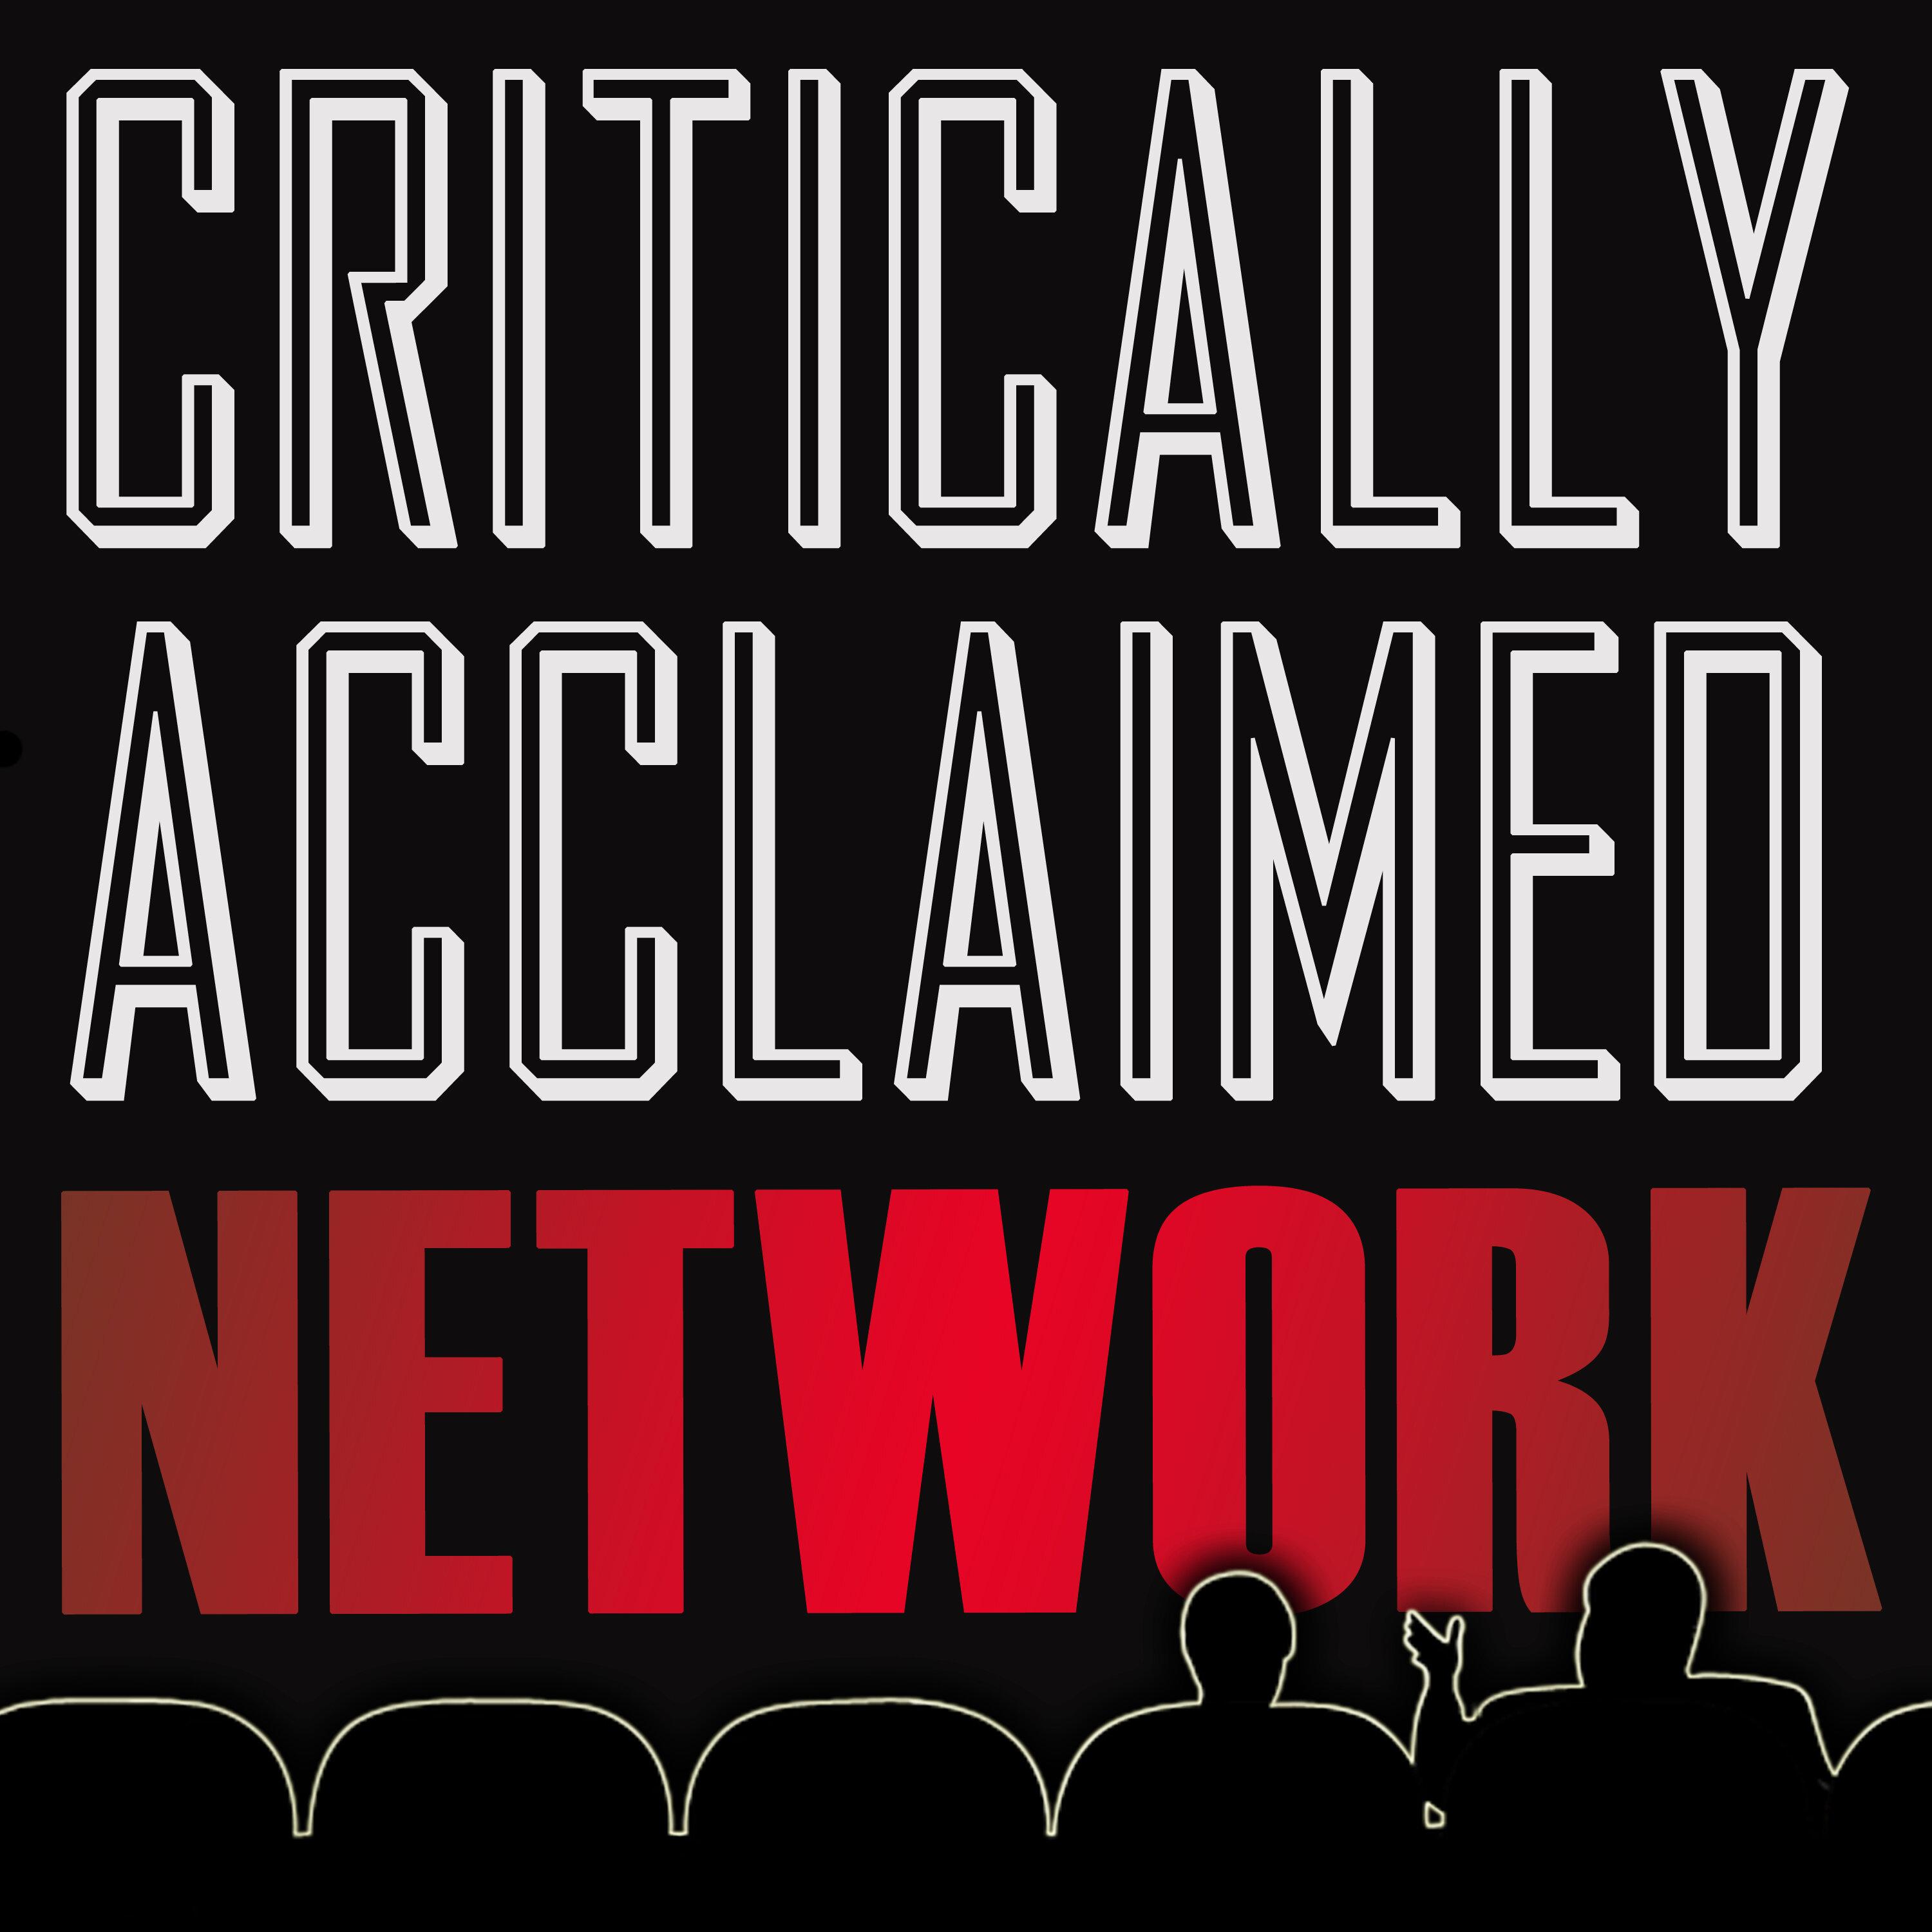 Critically Acclaimed Network